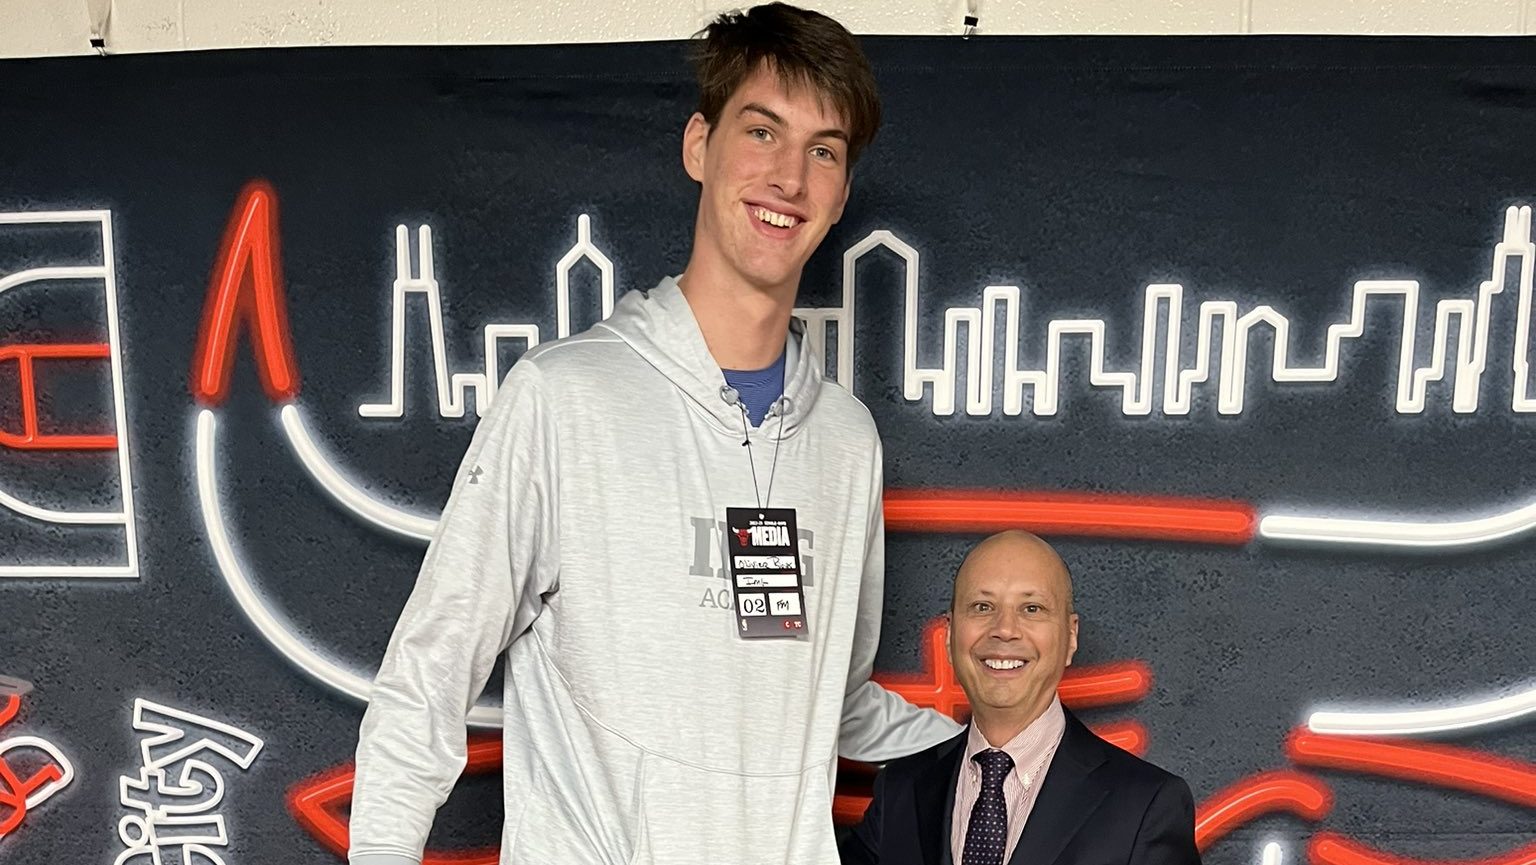 7-foot-6-olivier-rioux-world-s-tallest-teenager-lands-at-img-bvm-sports